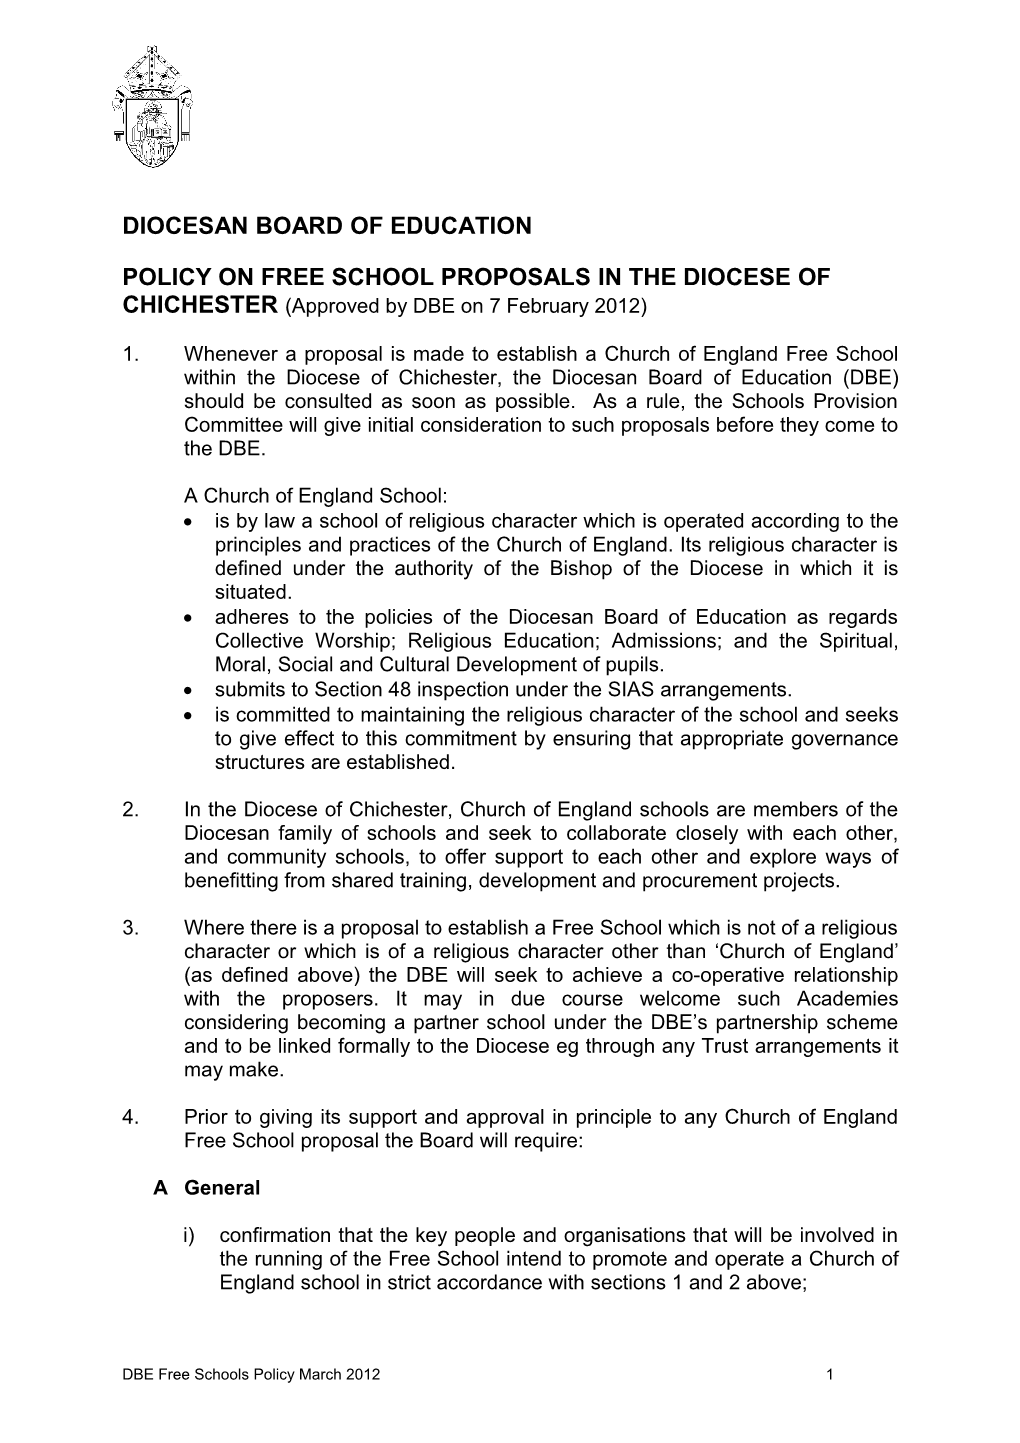 A Proposed Policy on Free School Proposals in the Diocese of Chichester